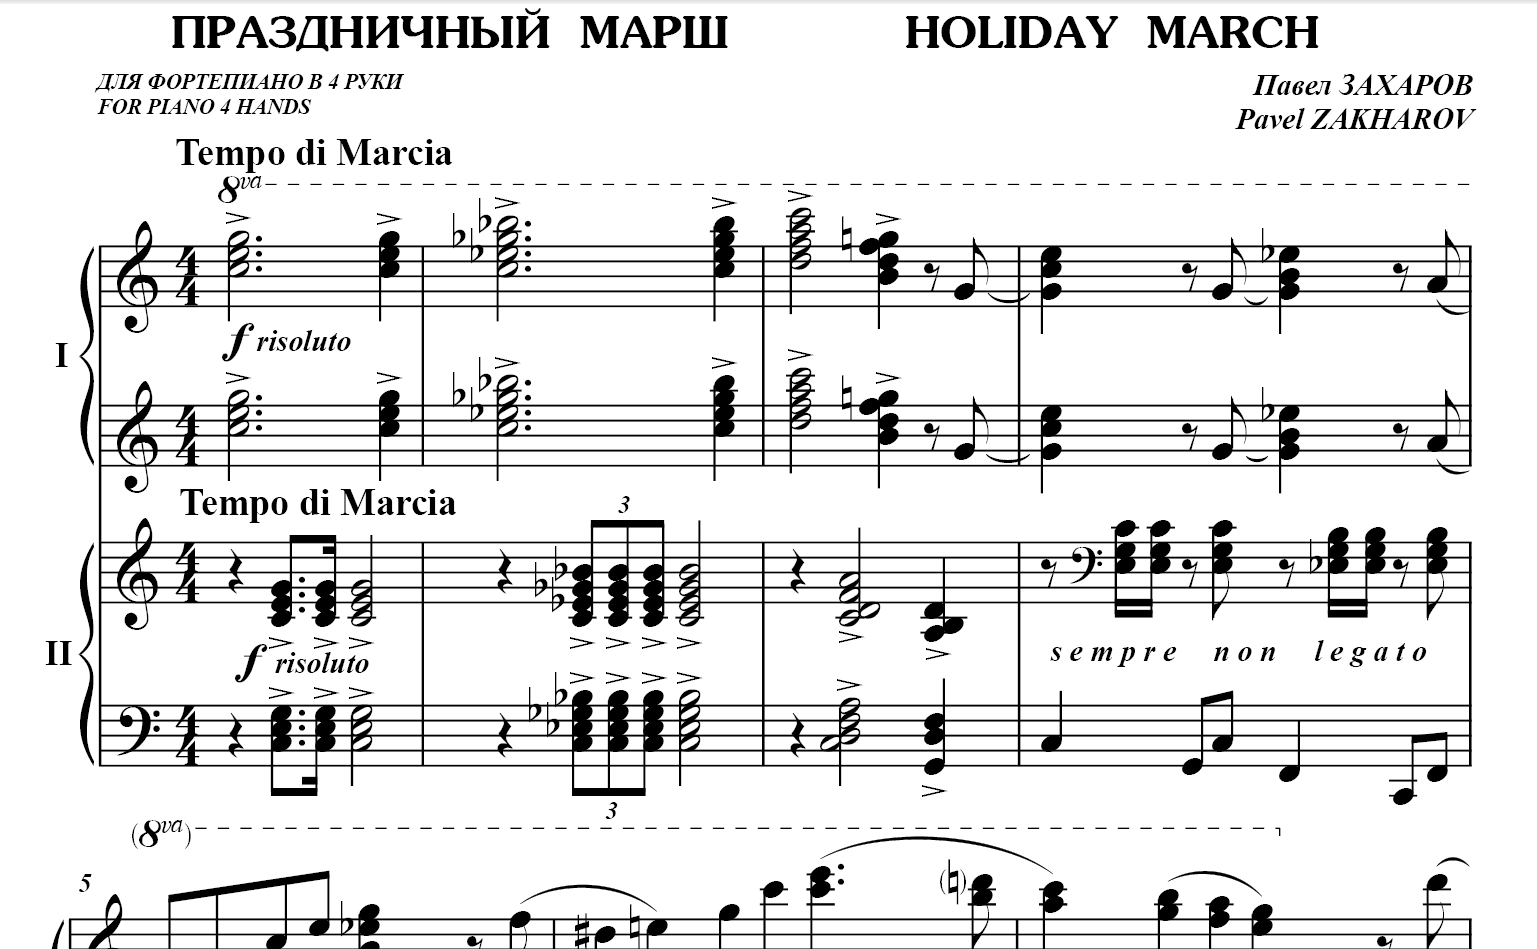 5s29 Holiday March, PAVEL ZAKHAROV / piano, 4 hands